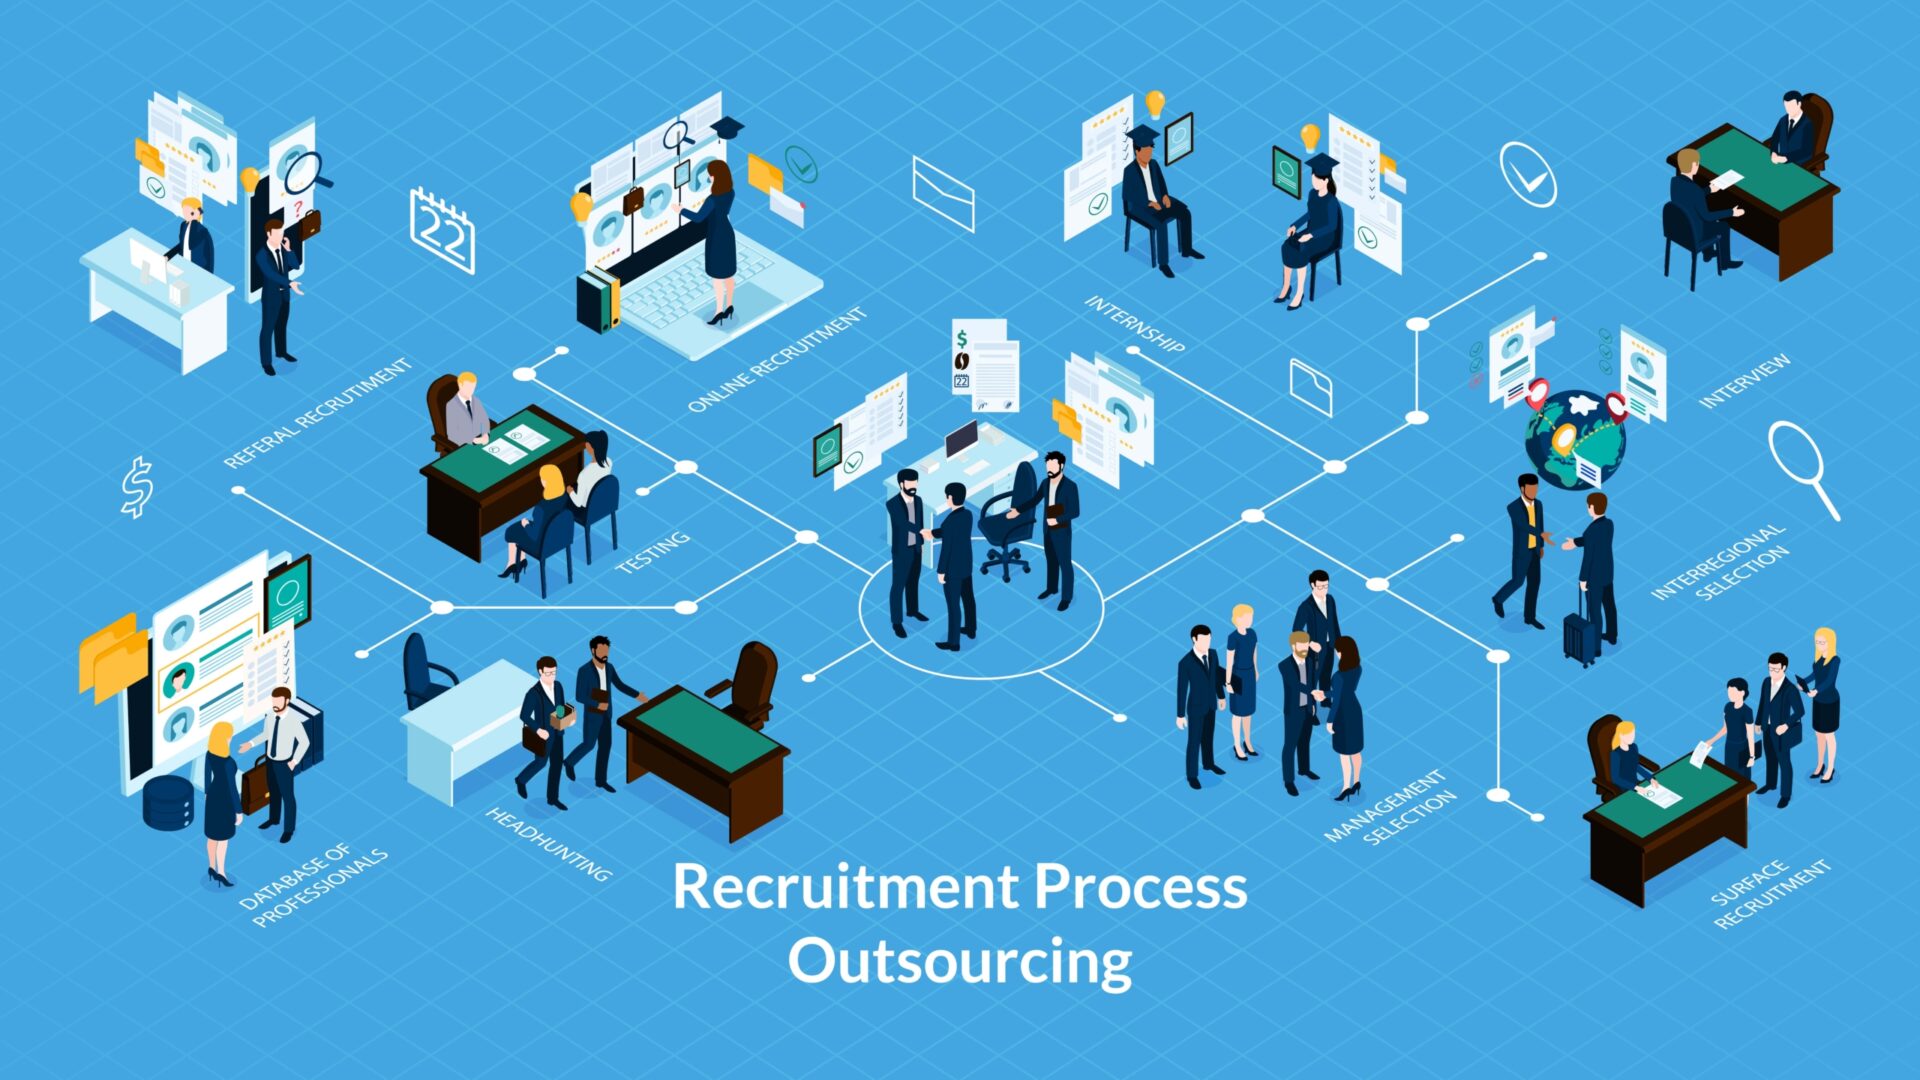 Dive into the world of Recruitment Process Outsourcing